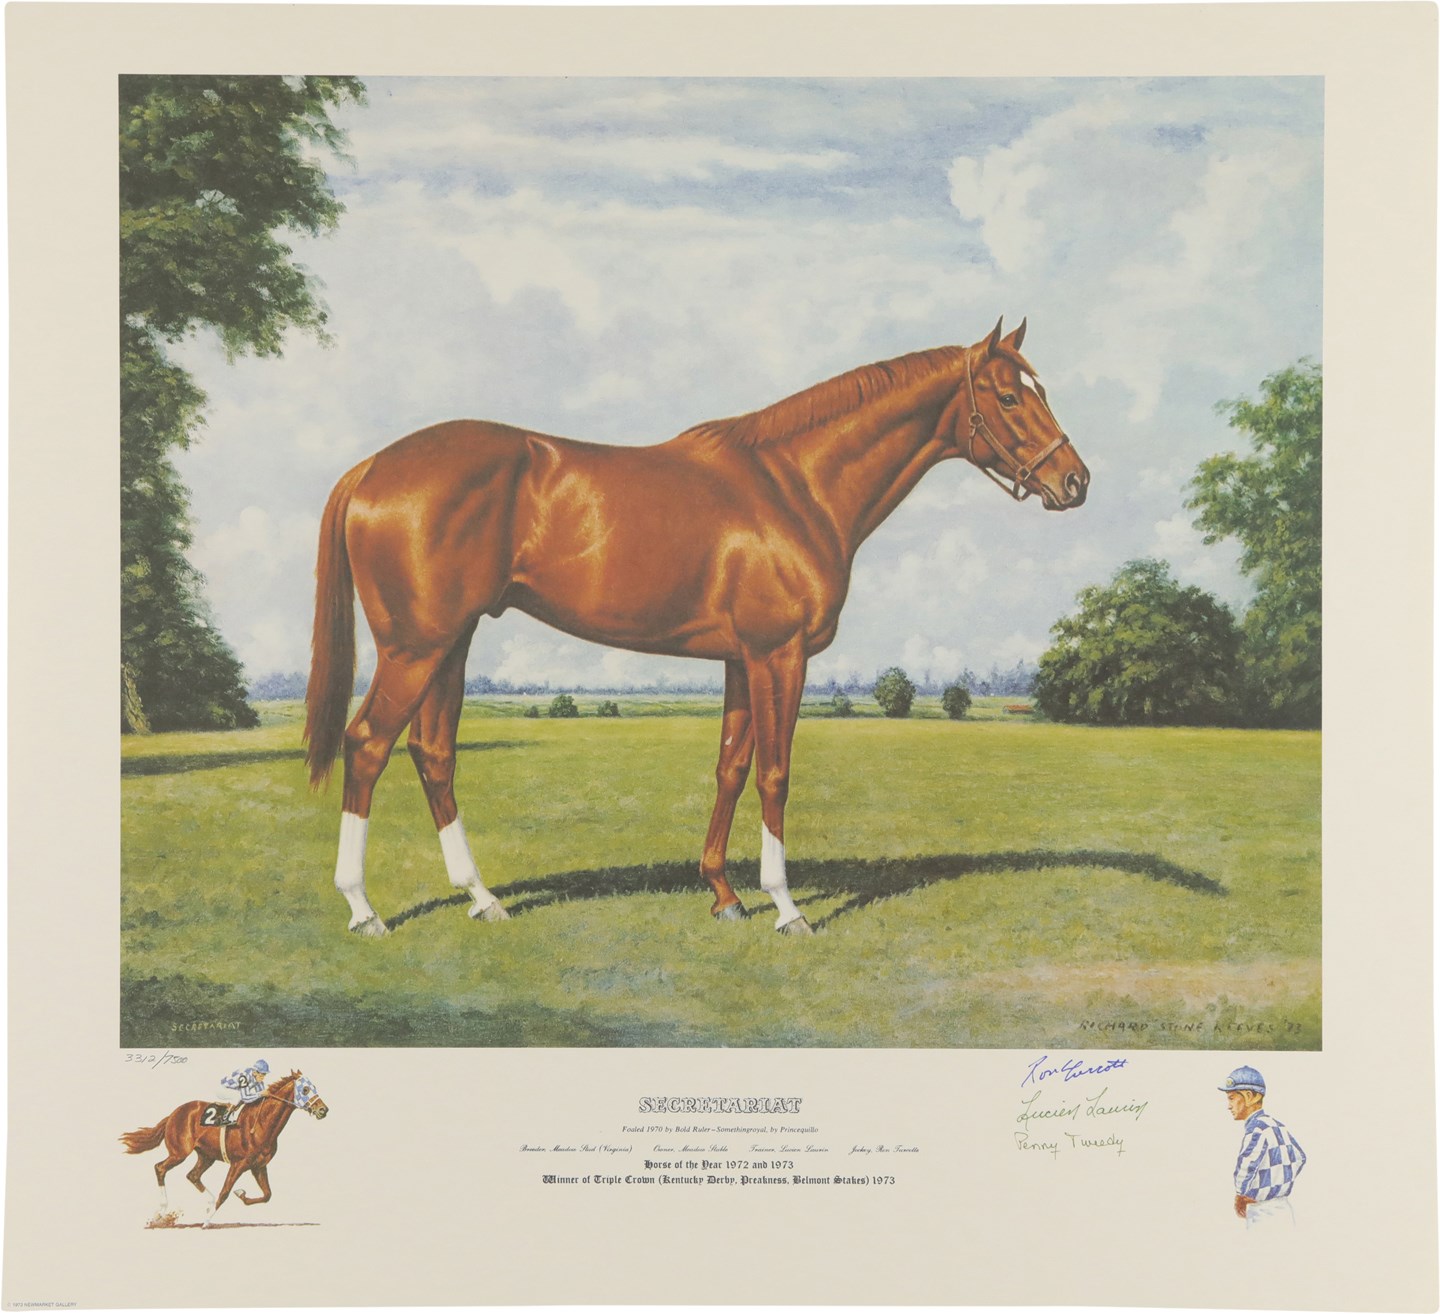 Horse Racing - Secretariat Limited-Edition Lithograph by Richard Stone Reeves Signed by the Owner, Jockey and Trainer